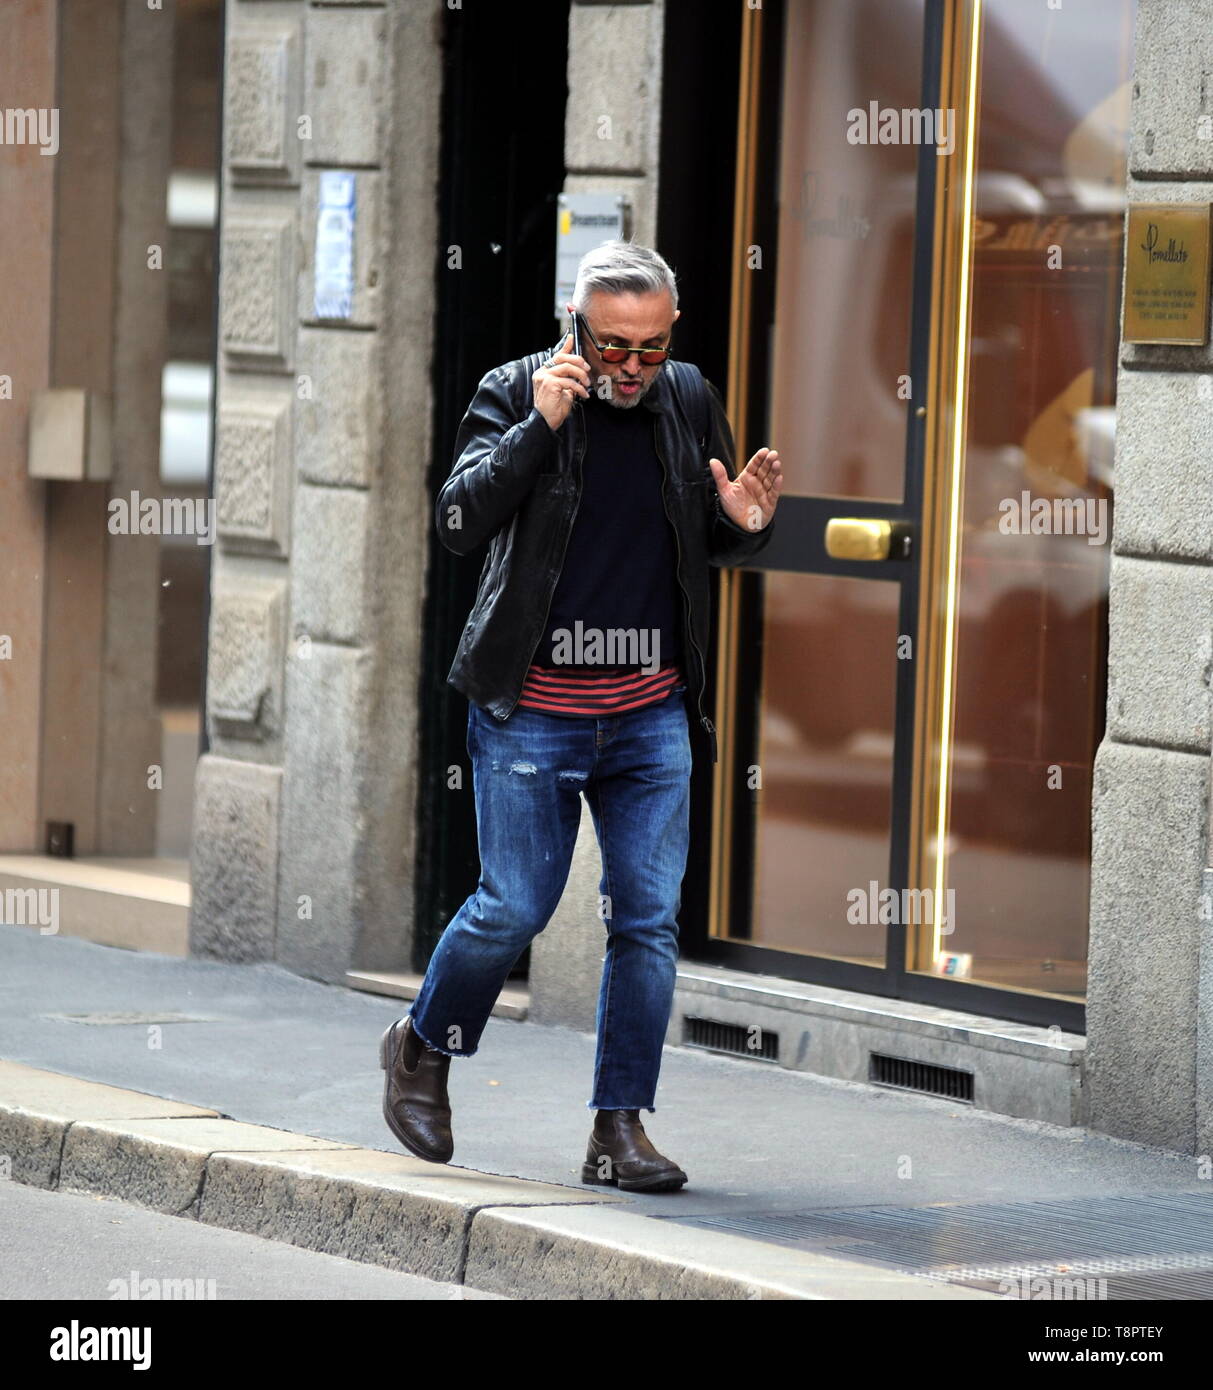 Milan, Bruno Barbieri in the center Chef BRUNO BARBIERI caught walking  downtown. Here he is engaged in several telephone conversations, often  interrupted by requests for souvenir photos, which he graciously grants  Stock